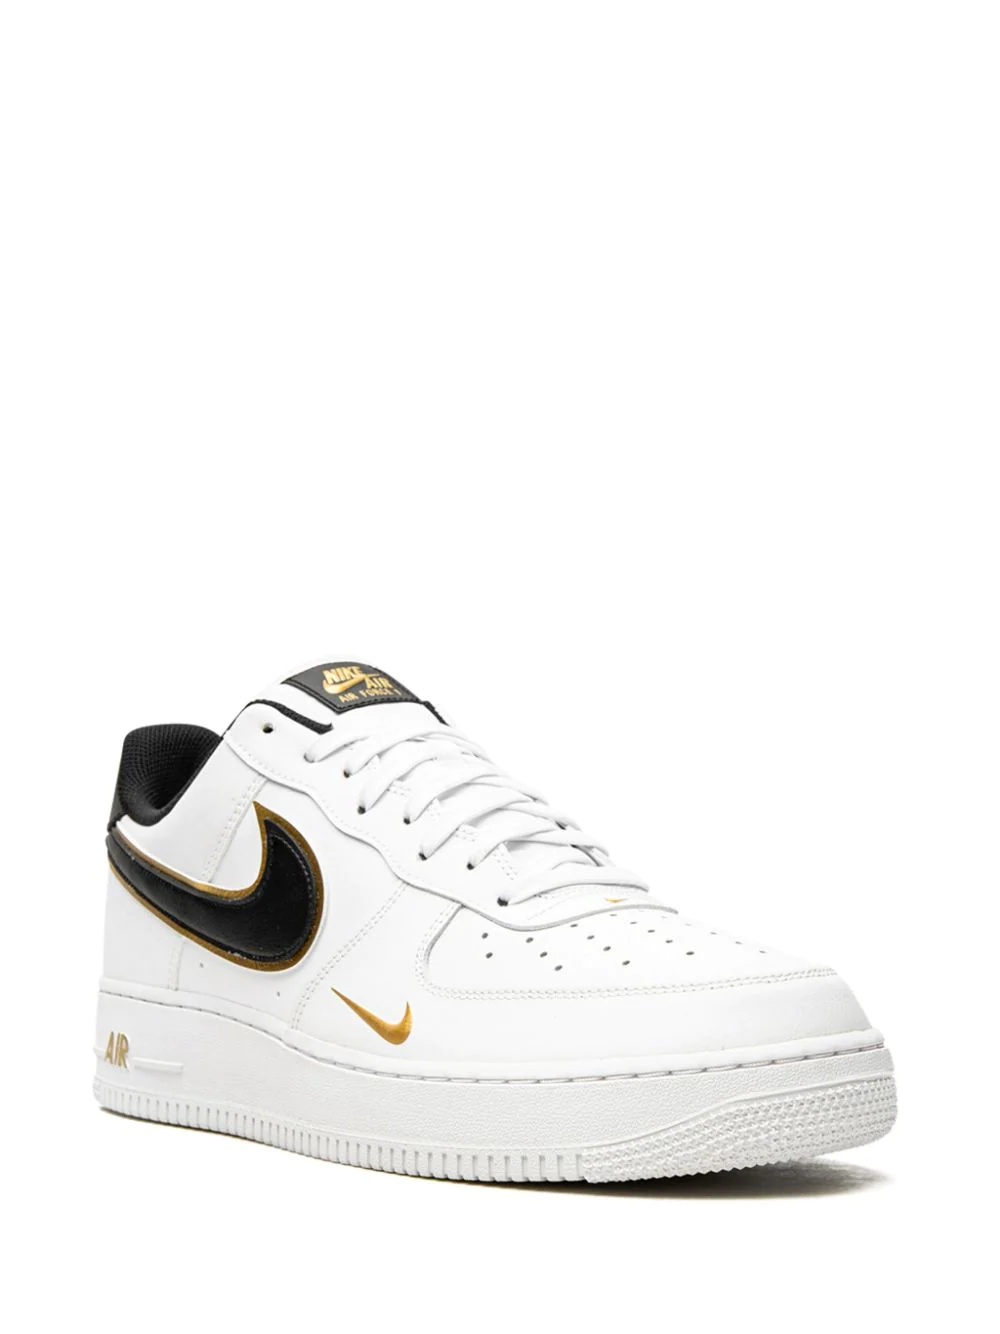 Air Force 1 '07 LV8 ''Double Swoosh - White/Black/Gold'' sneakers - 2